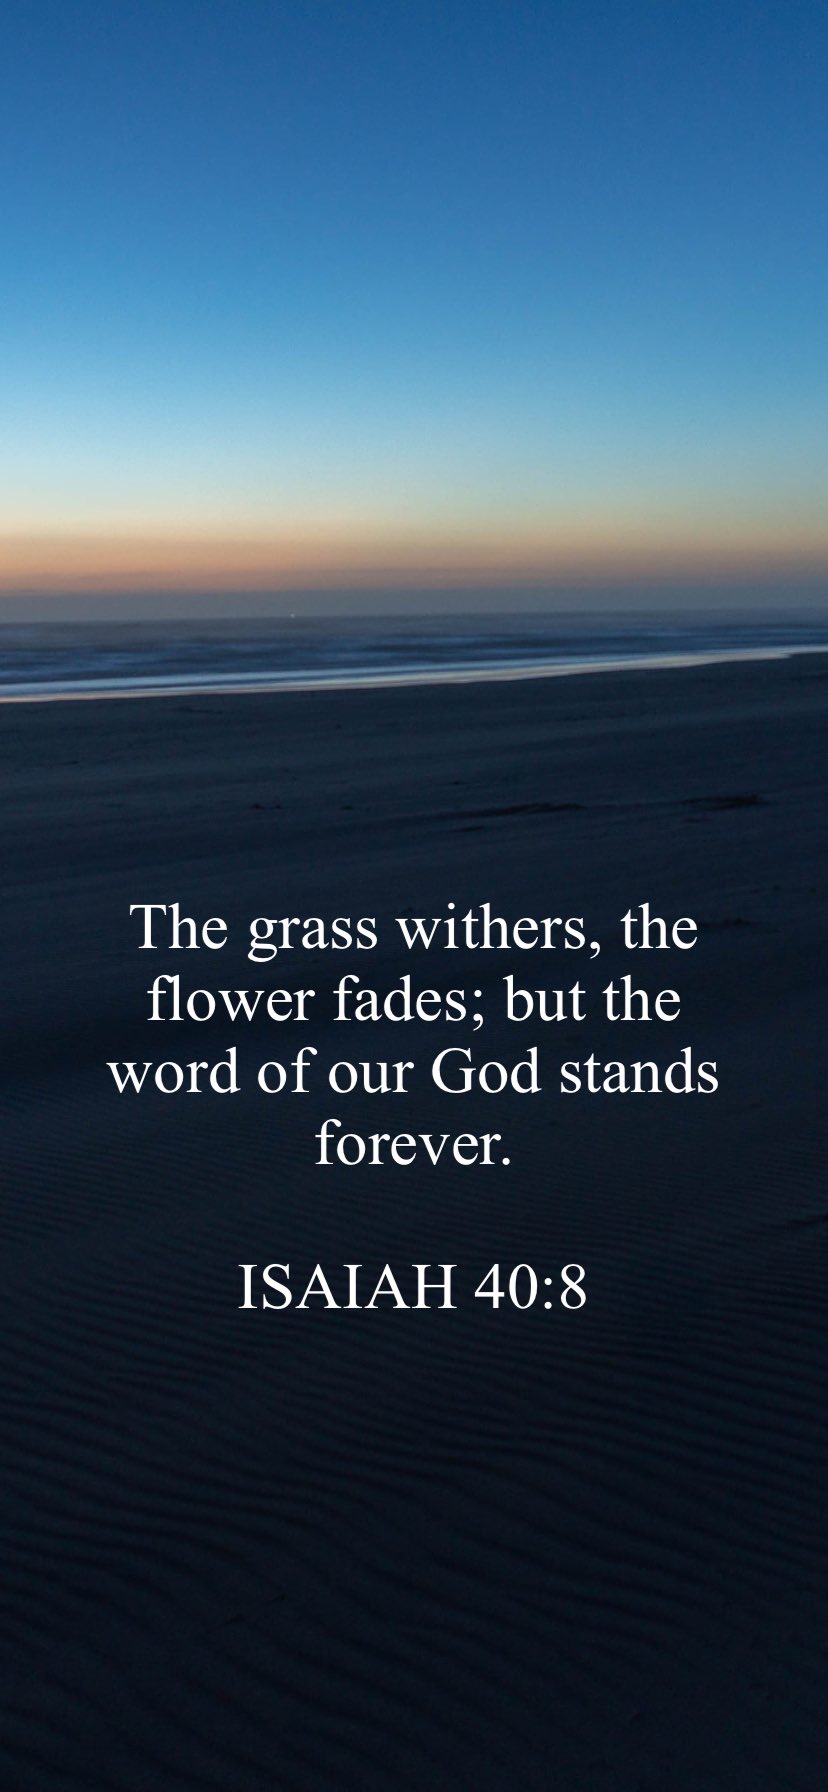 The grass withers, the flower fades; but the word of our God stands forever: ISAIAH 40.8